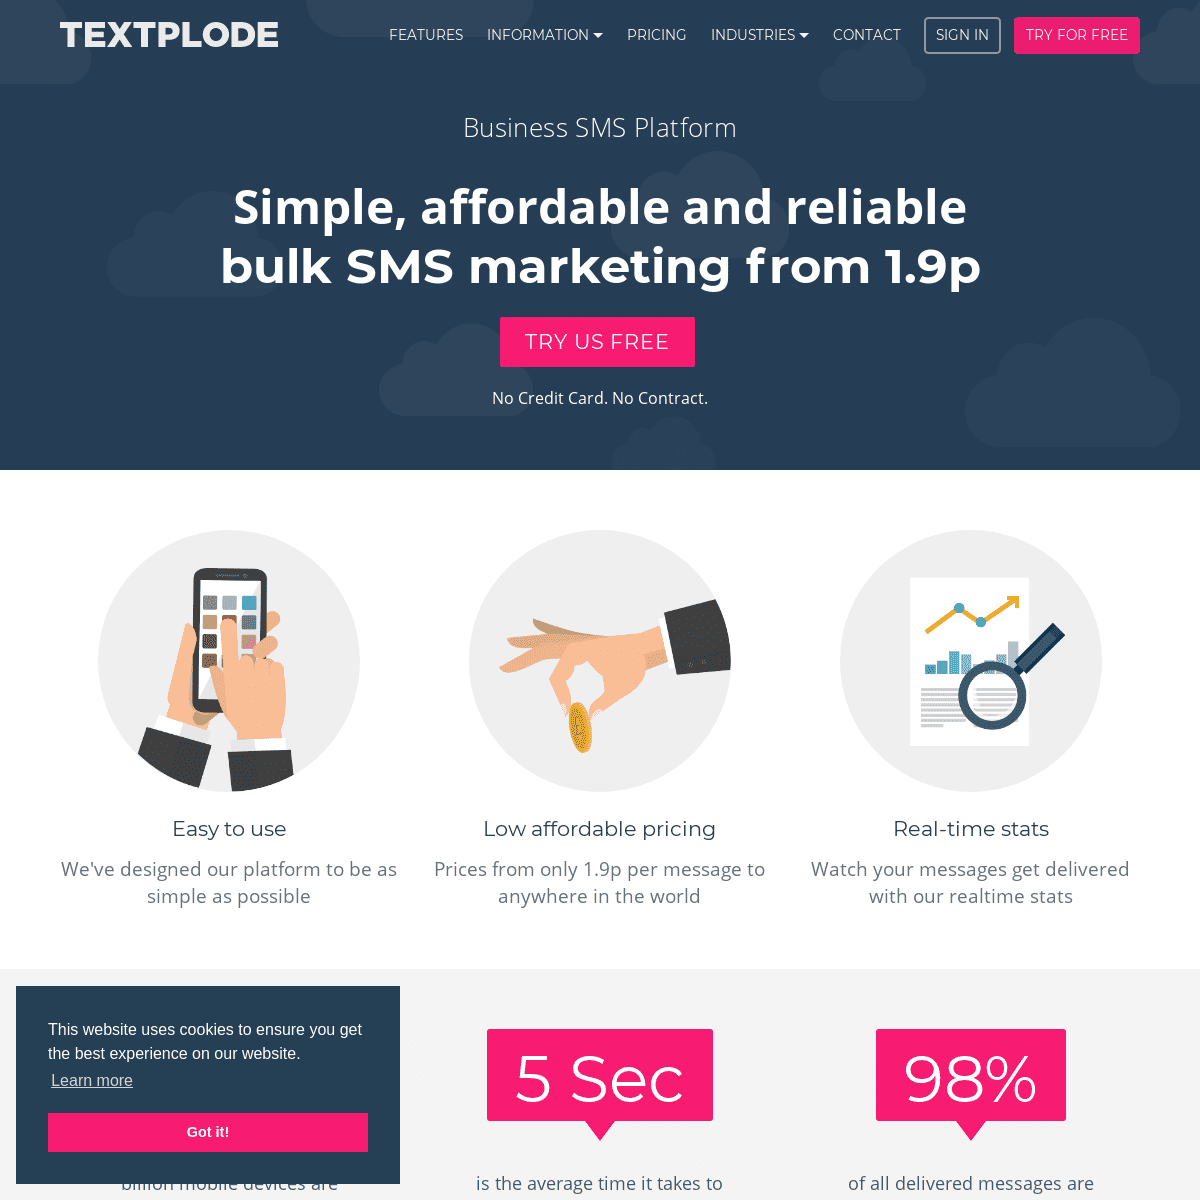 A complete backup of textplode.com